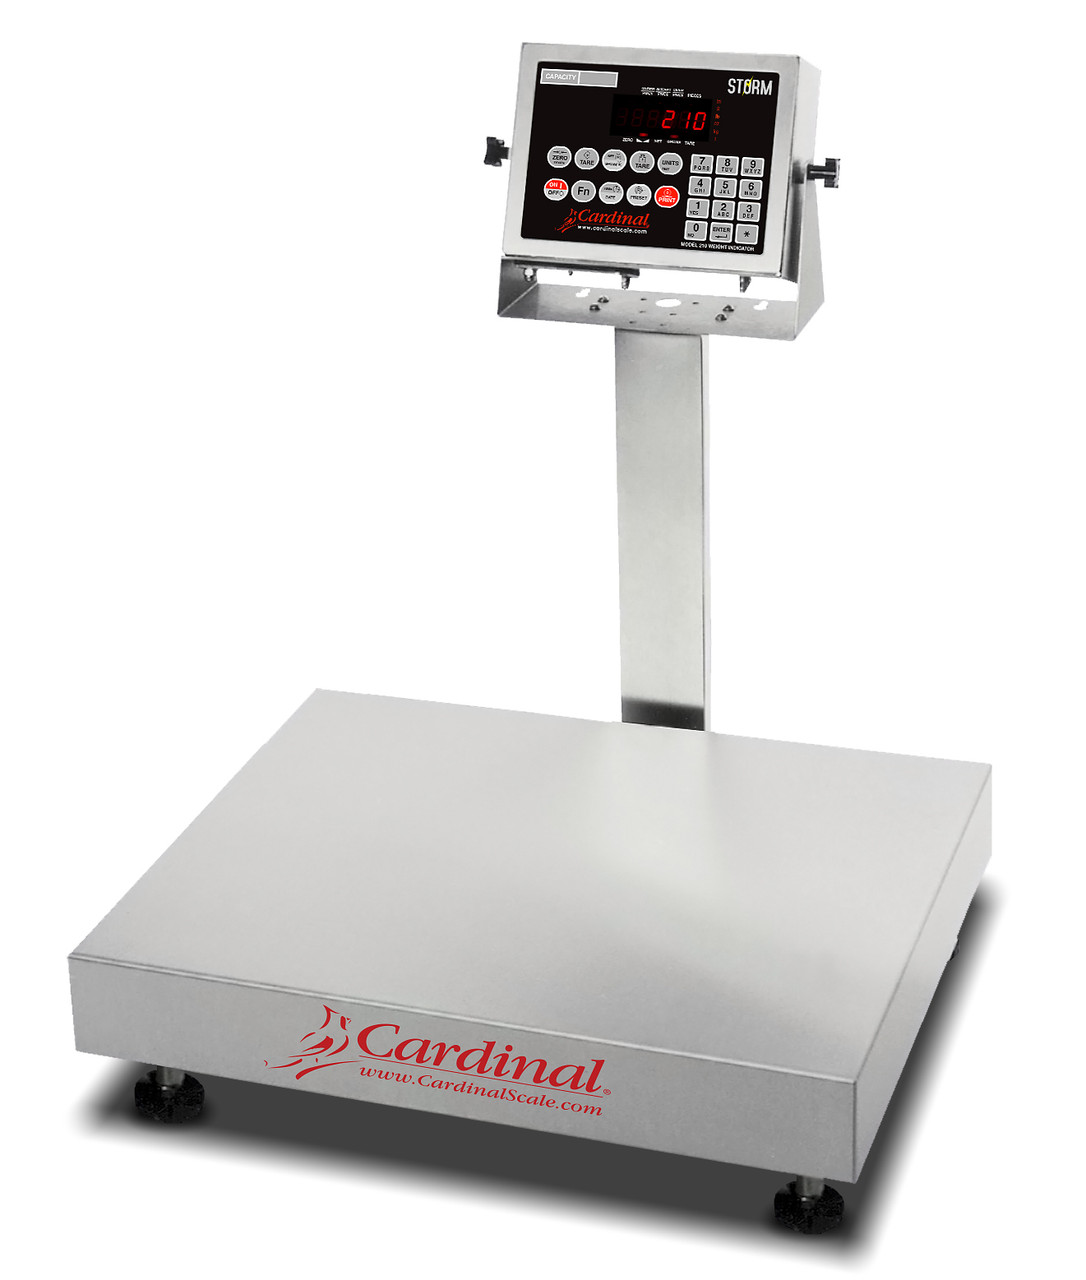 Cardinal Detecto 300 Lb Electronic Bench Scale 24" x 20" Stainless Steel 210 Indicator, Model# EB-300-210